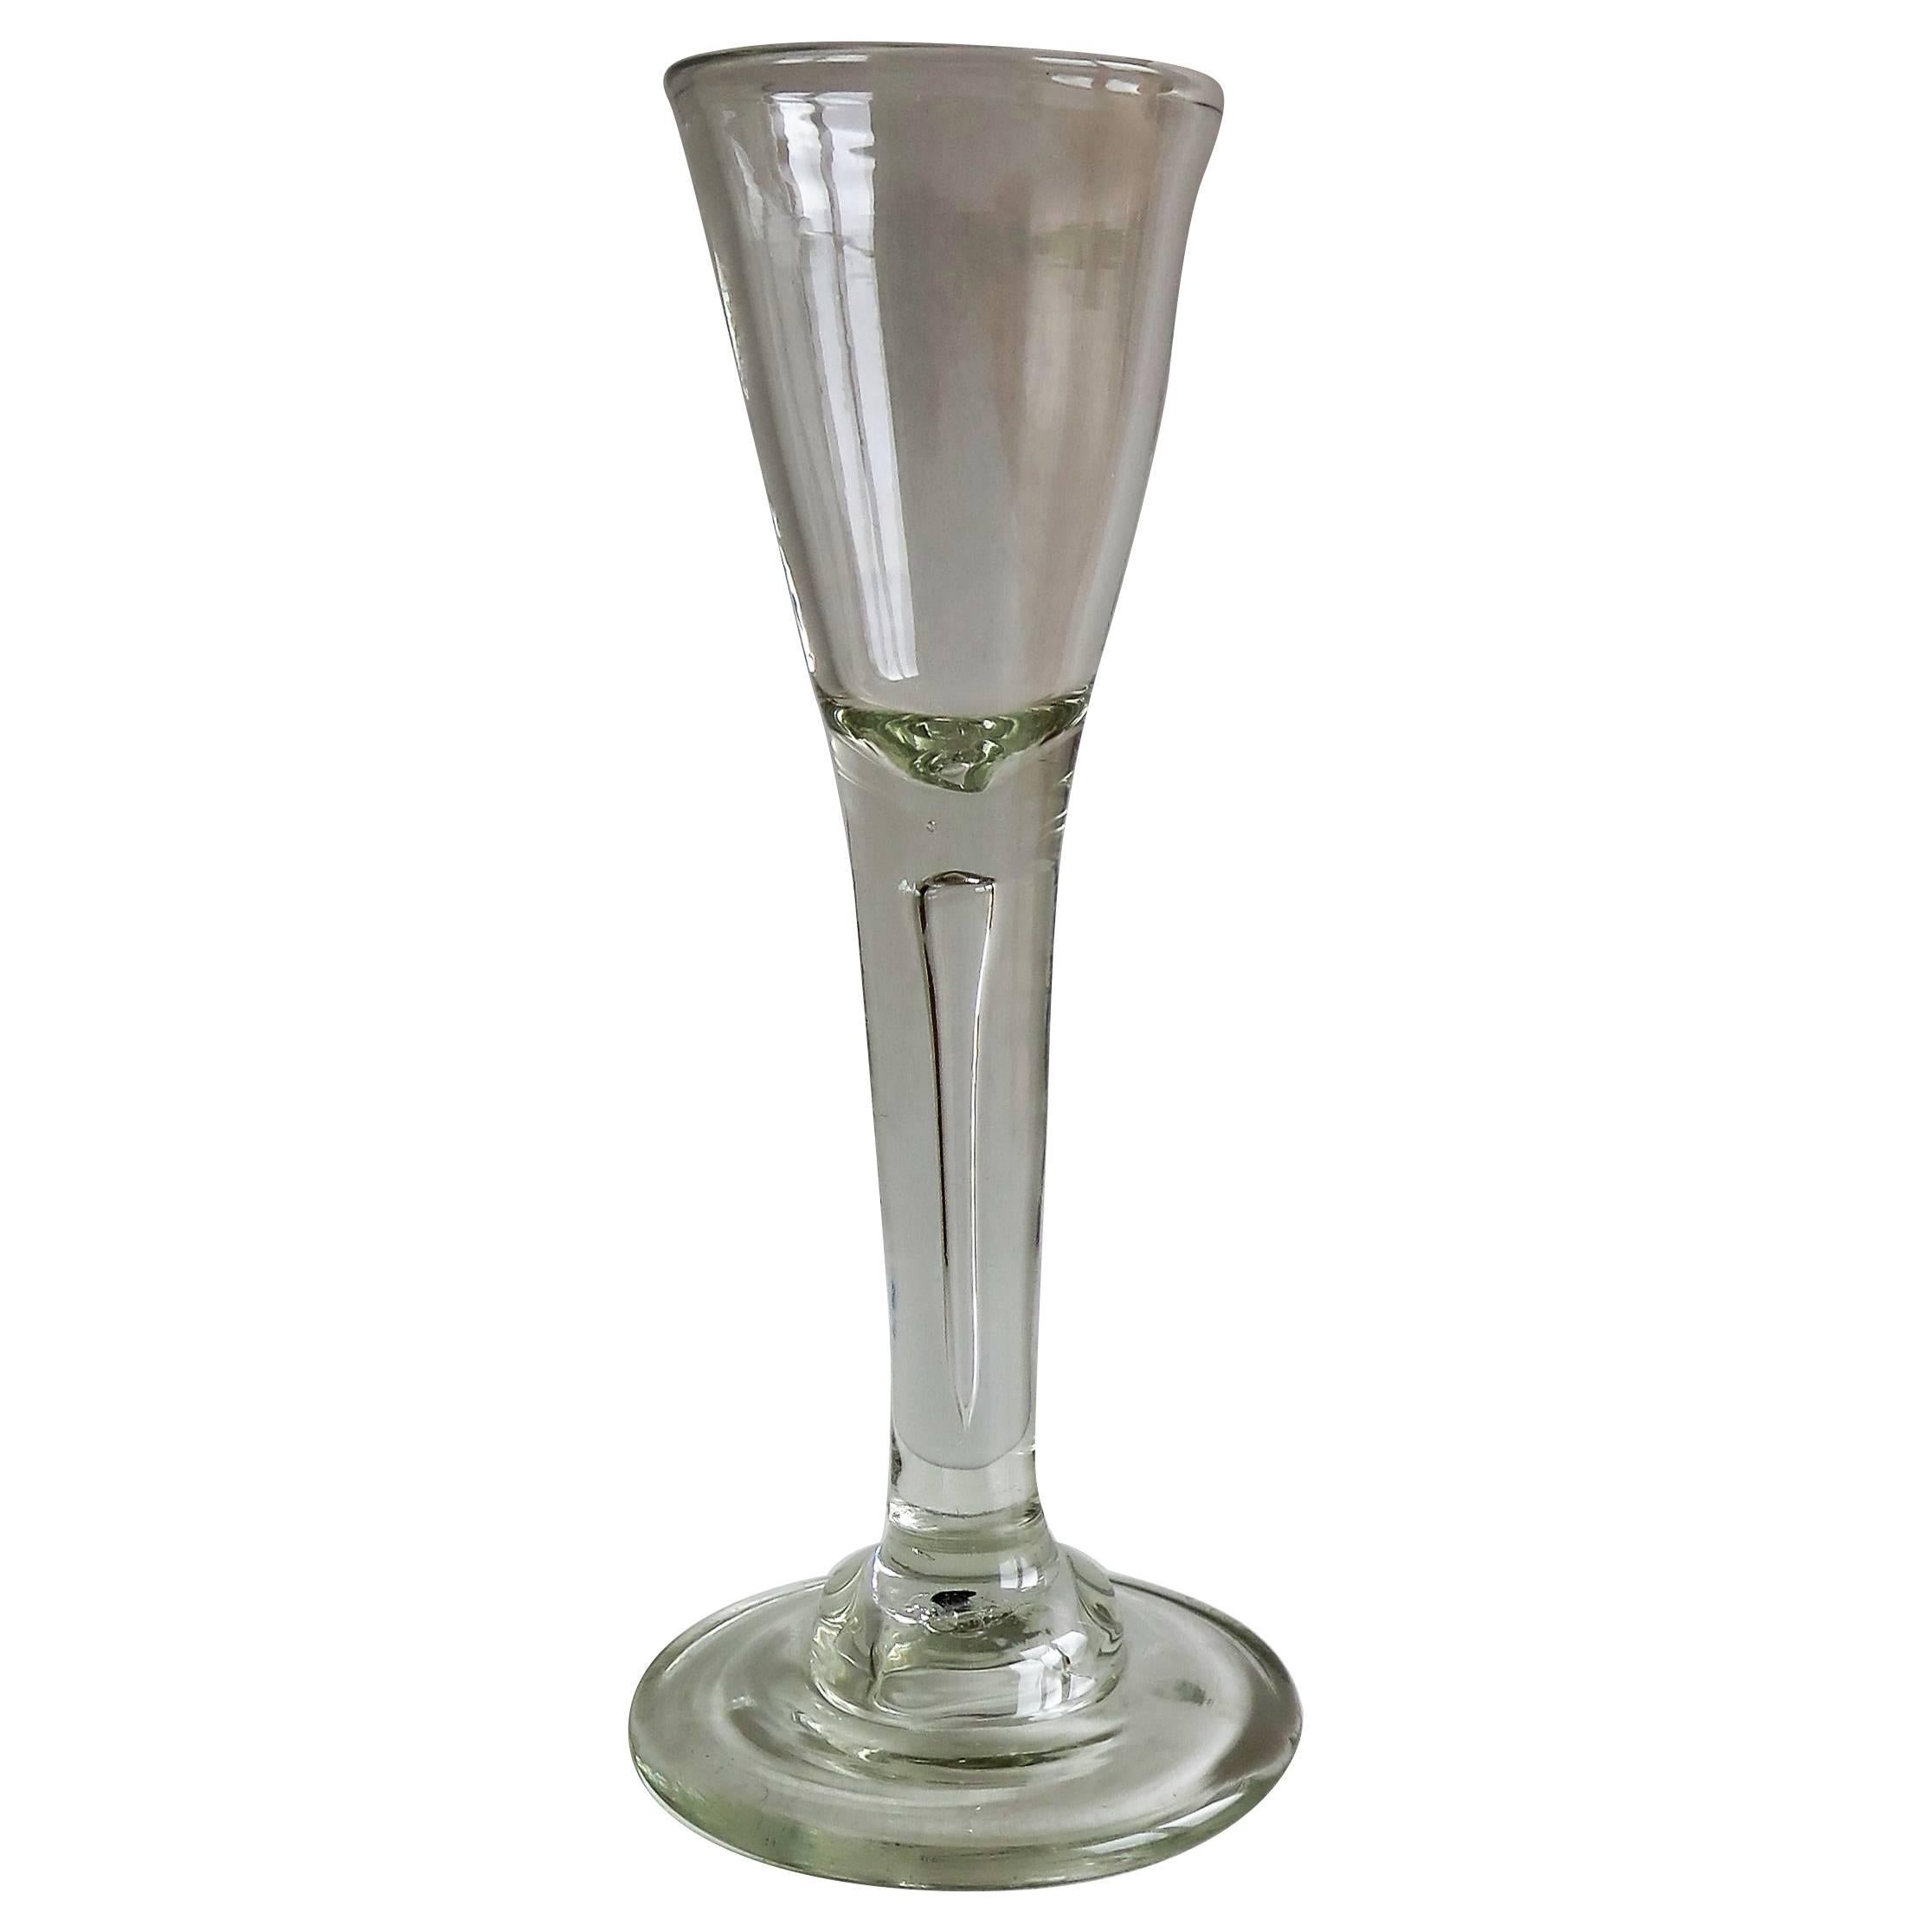 This is a tall mid-18th century, hand blown, wine glass with a drawn round funnel shaped bowl having a solid base. The bowl extends into a tapered solid drawn stem with a long tear (air bubble formed by the glass blower) through most of its length.